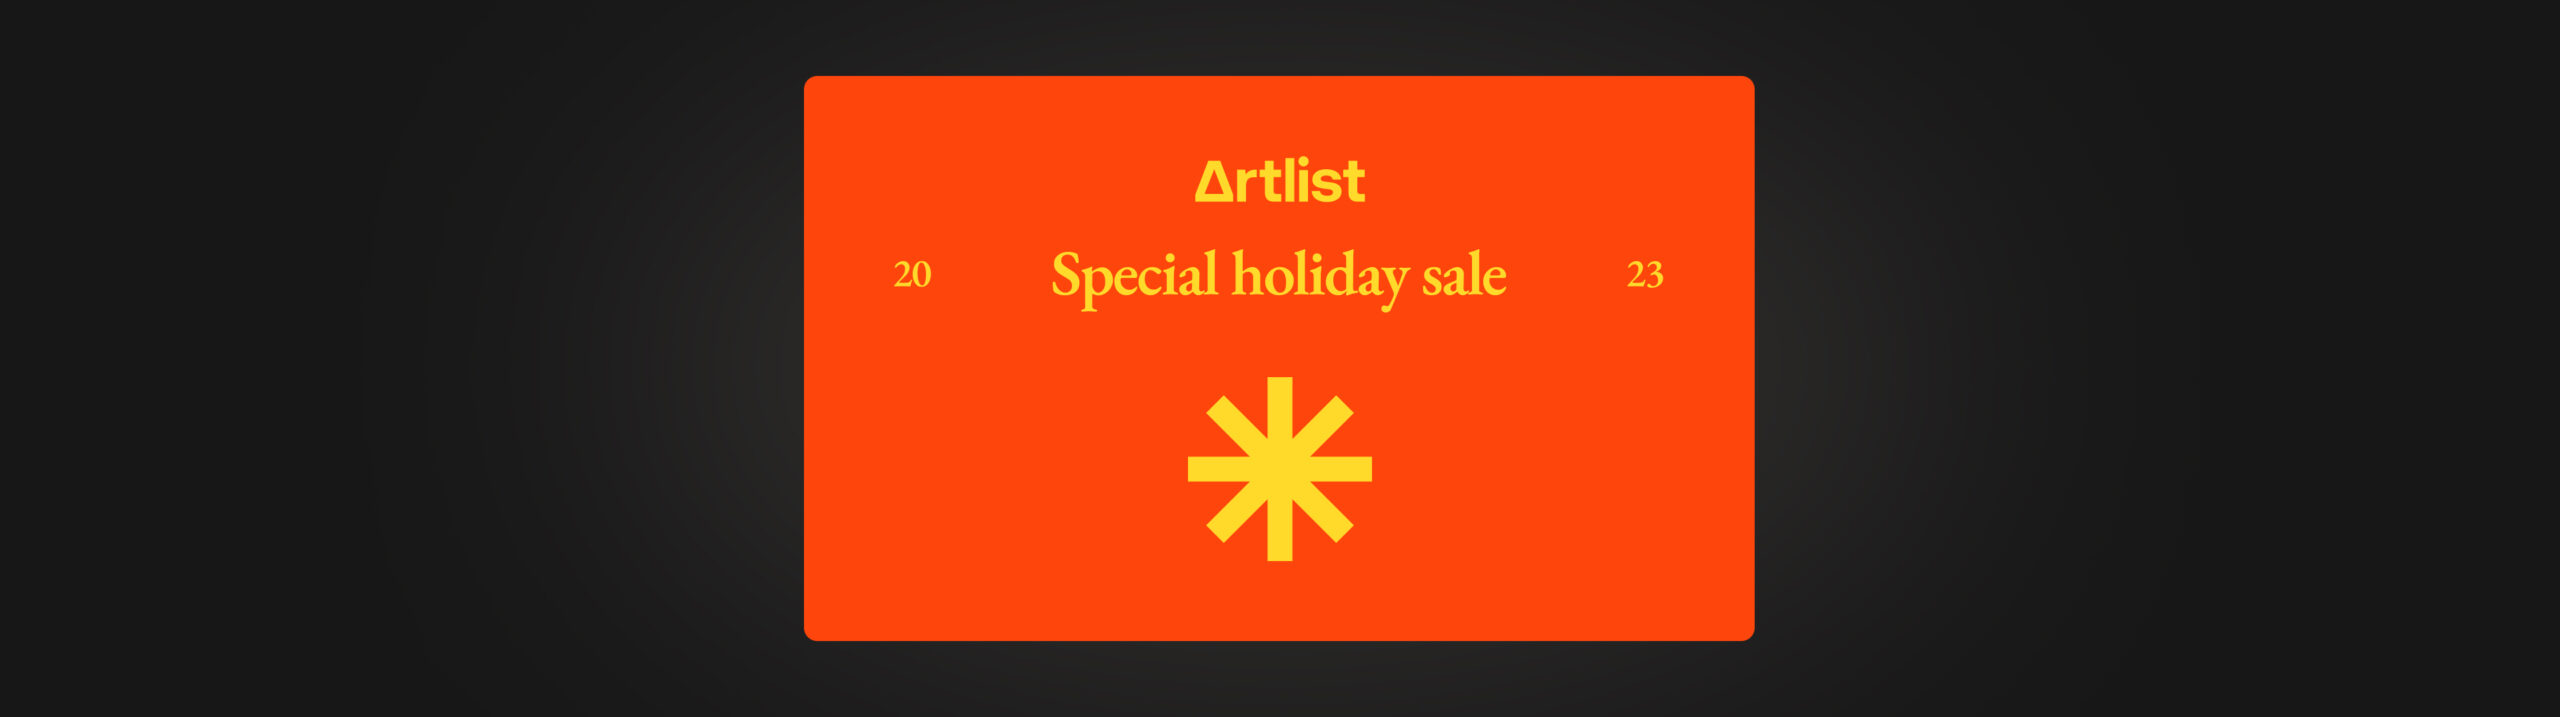 Hurry, the Artlist holiday sale is here!